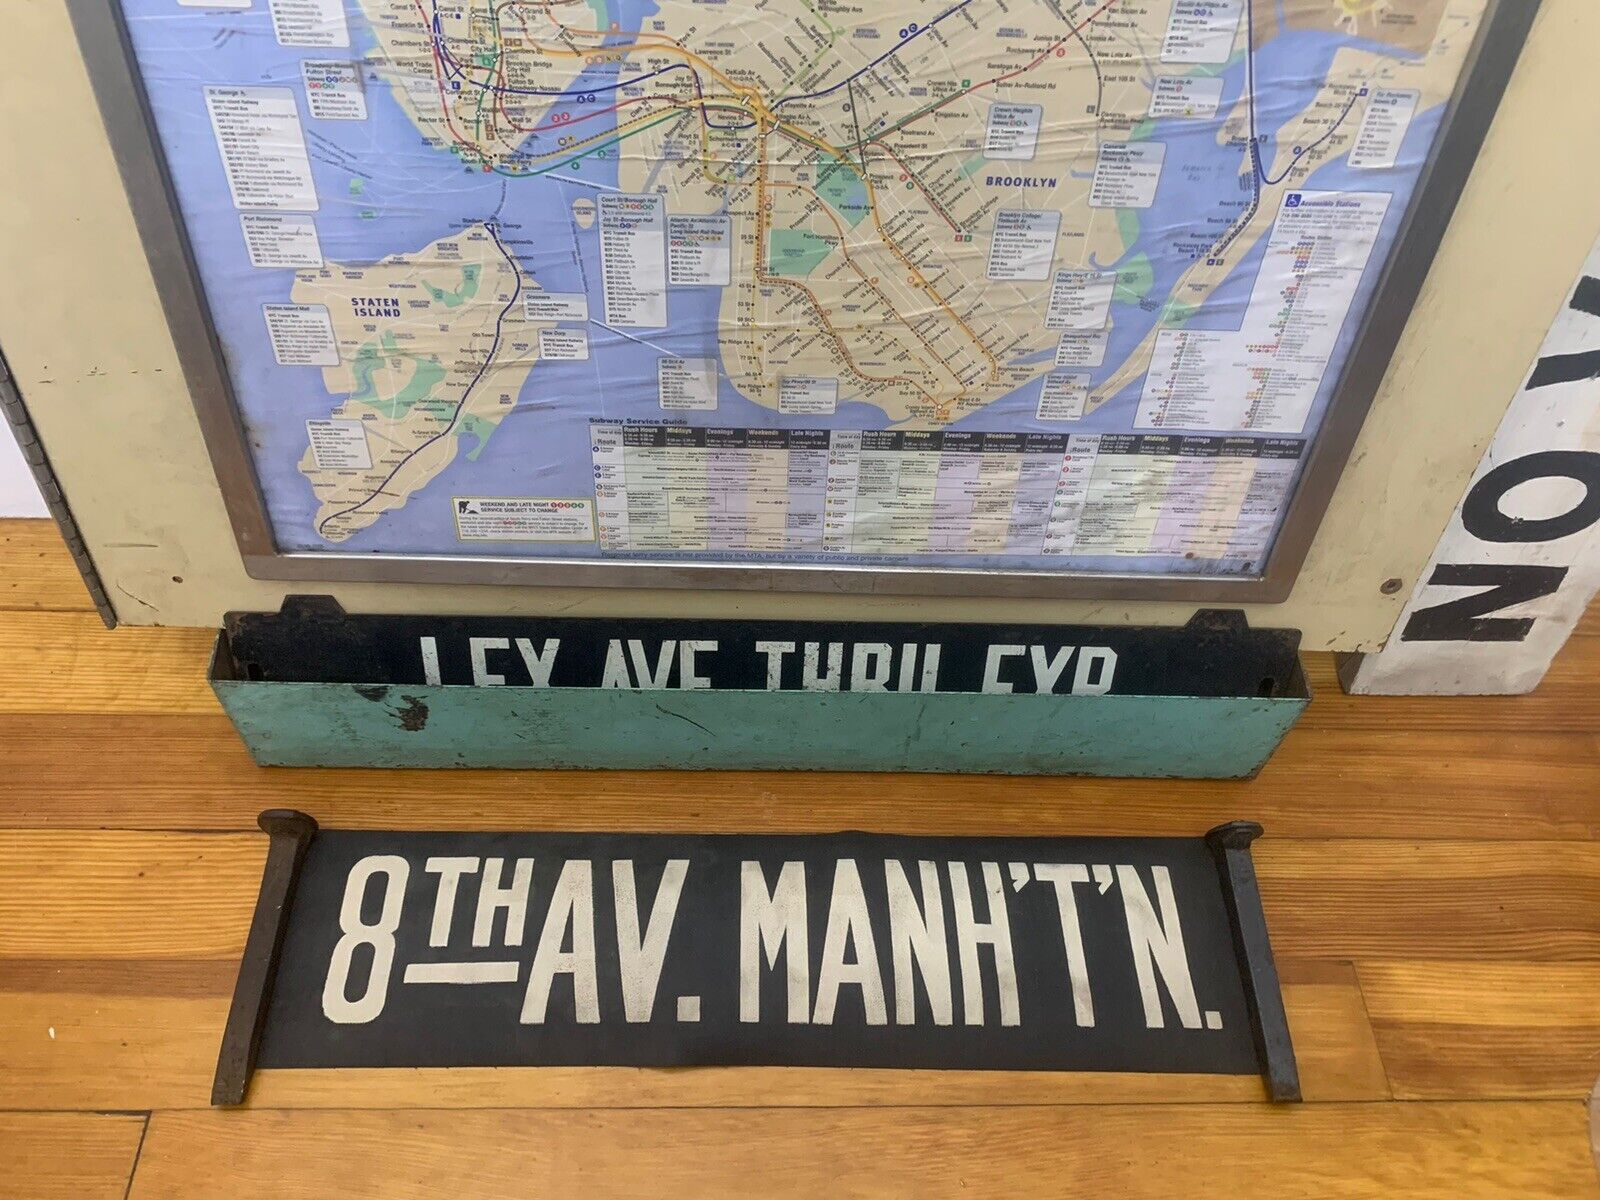 NYC SUBWAY ROLL SIGN BMT 8TH EIGHTH AVENUE MANHATTAN HEARST TOWER HARLEM NY ART